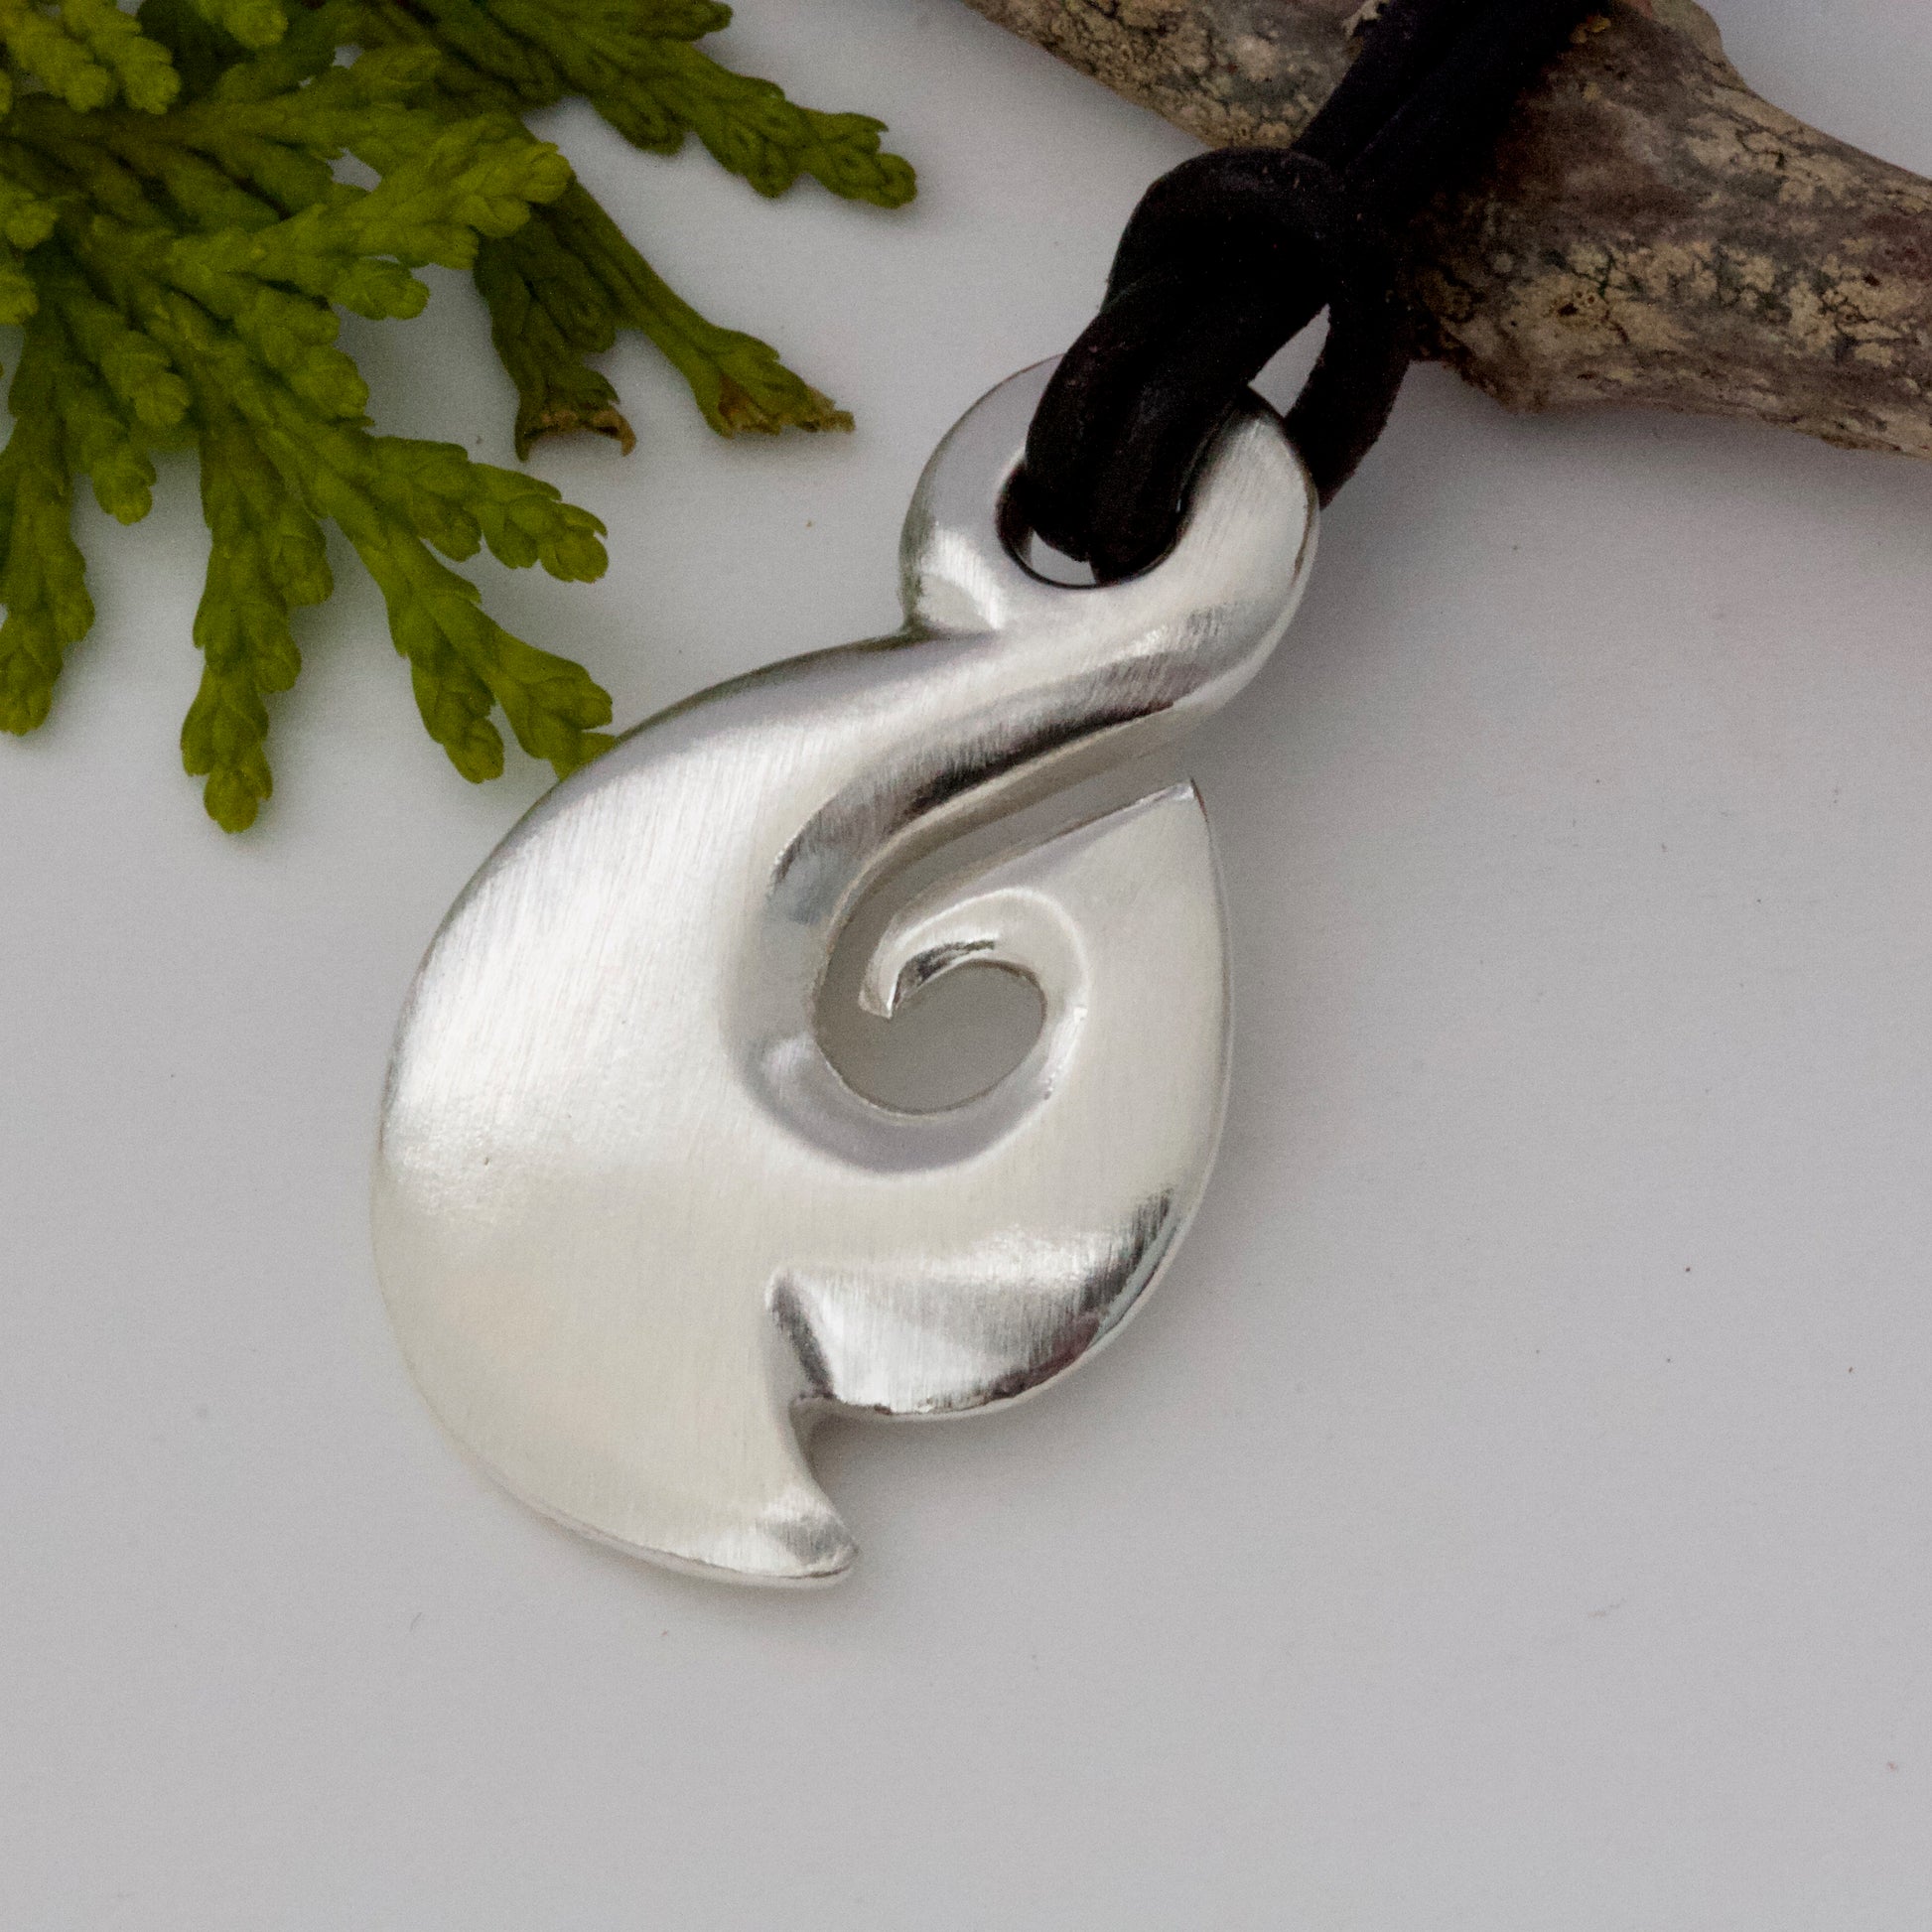 Sterling Silver Fish Hook Necklace